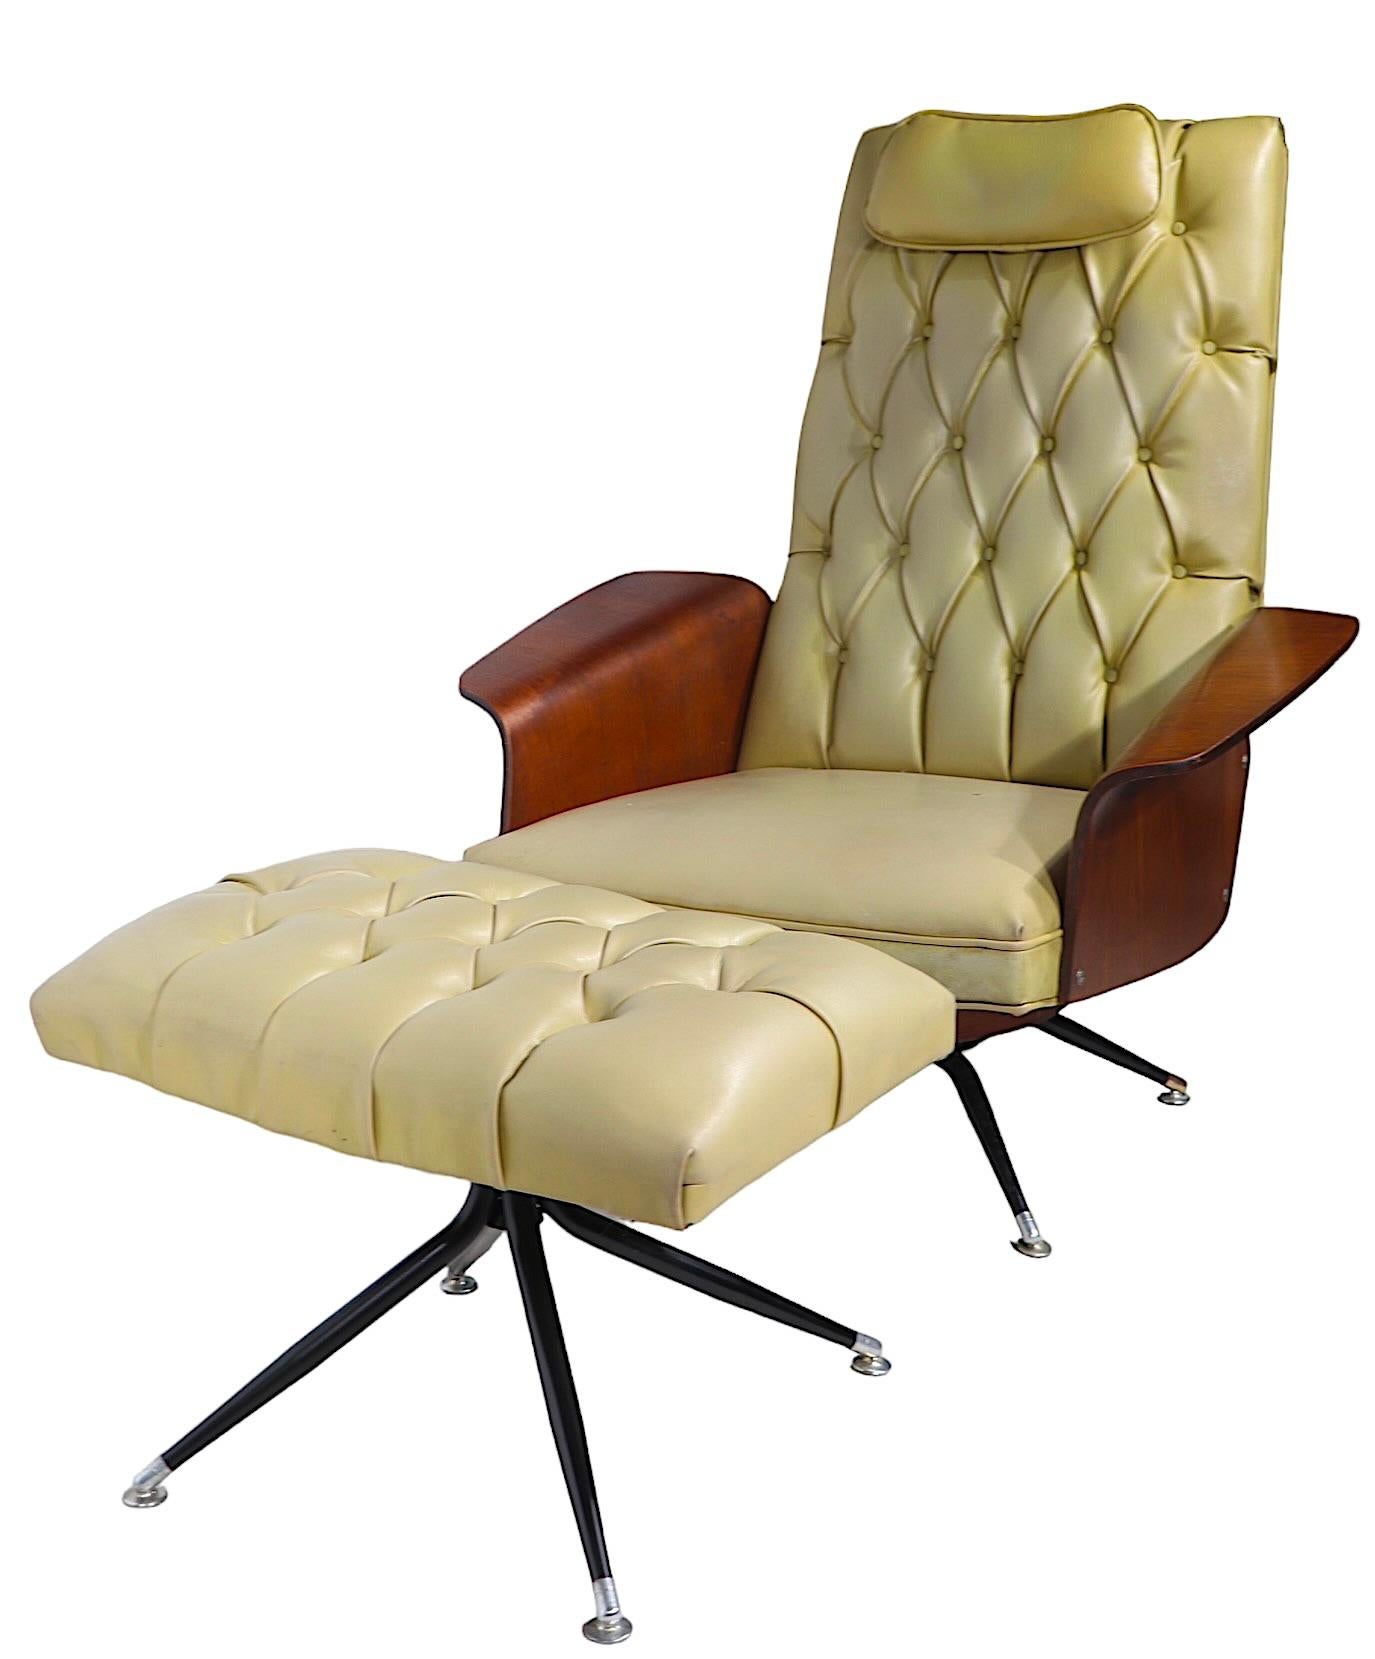 American Mid Century Lounge Chair and Ottoman by Murphy Miller for Plycraft c 1950’s For Sale